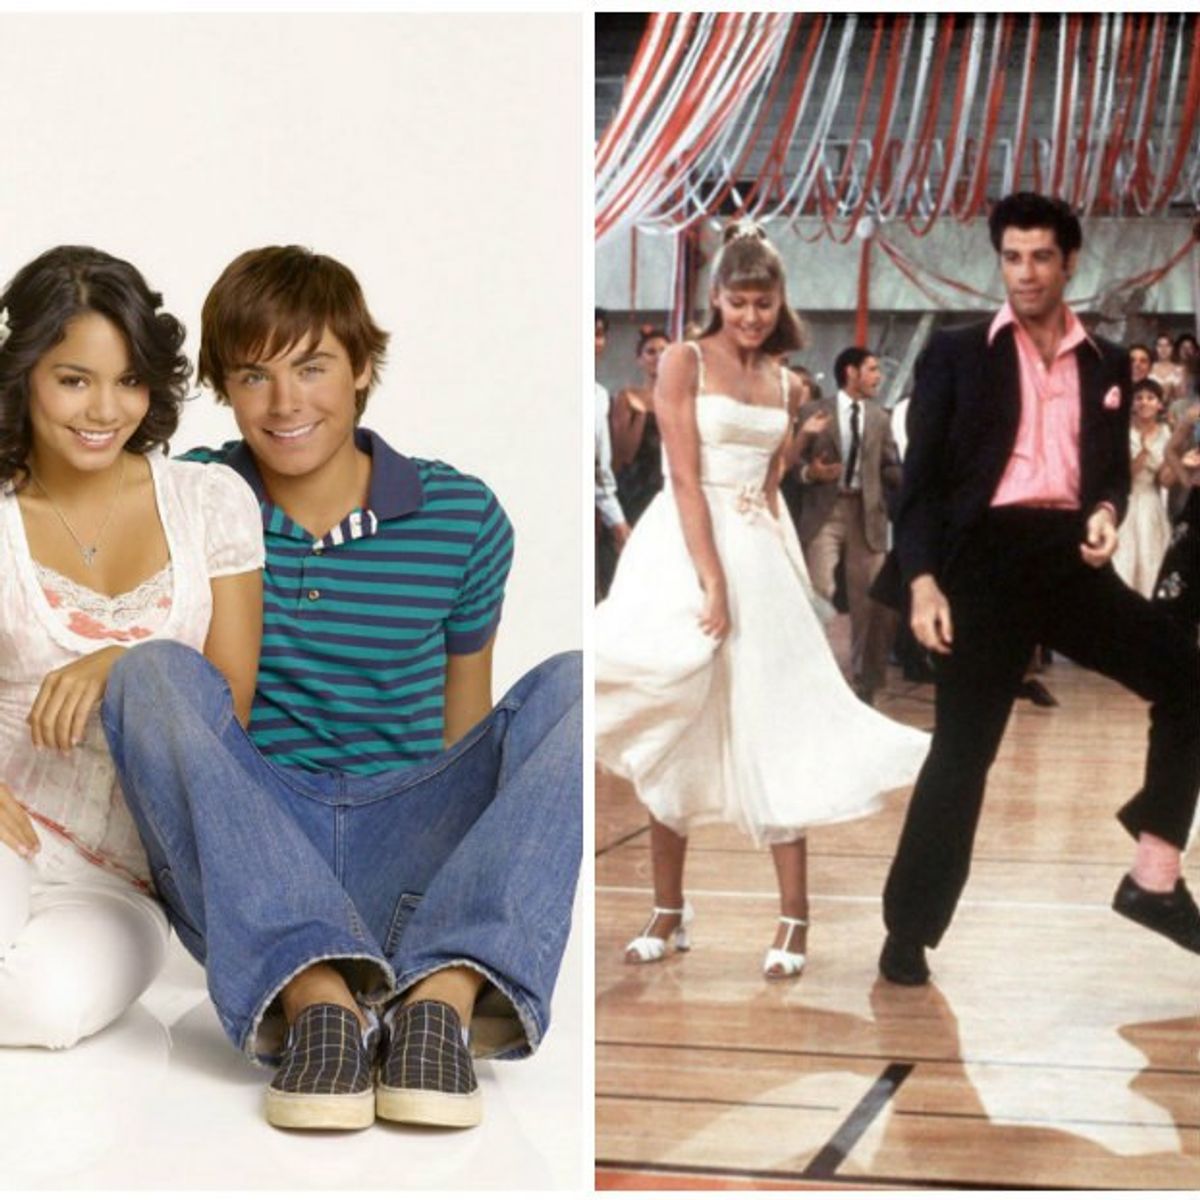 5 Reasons Why I Think 'High School Musical' Is A Modern Day Take On 'Grease'